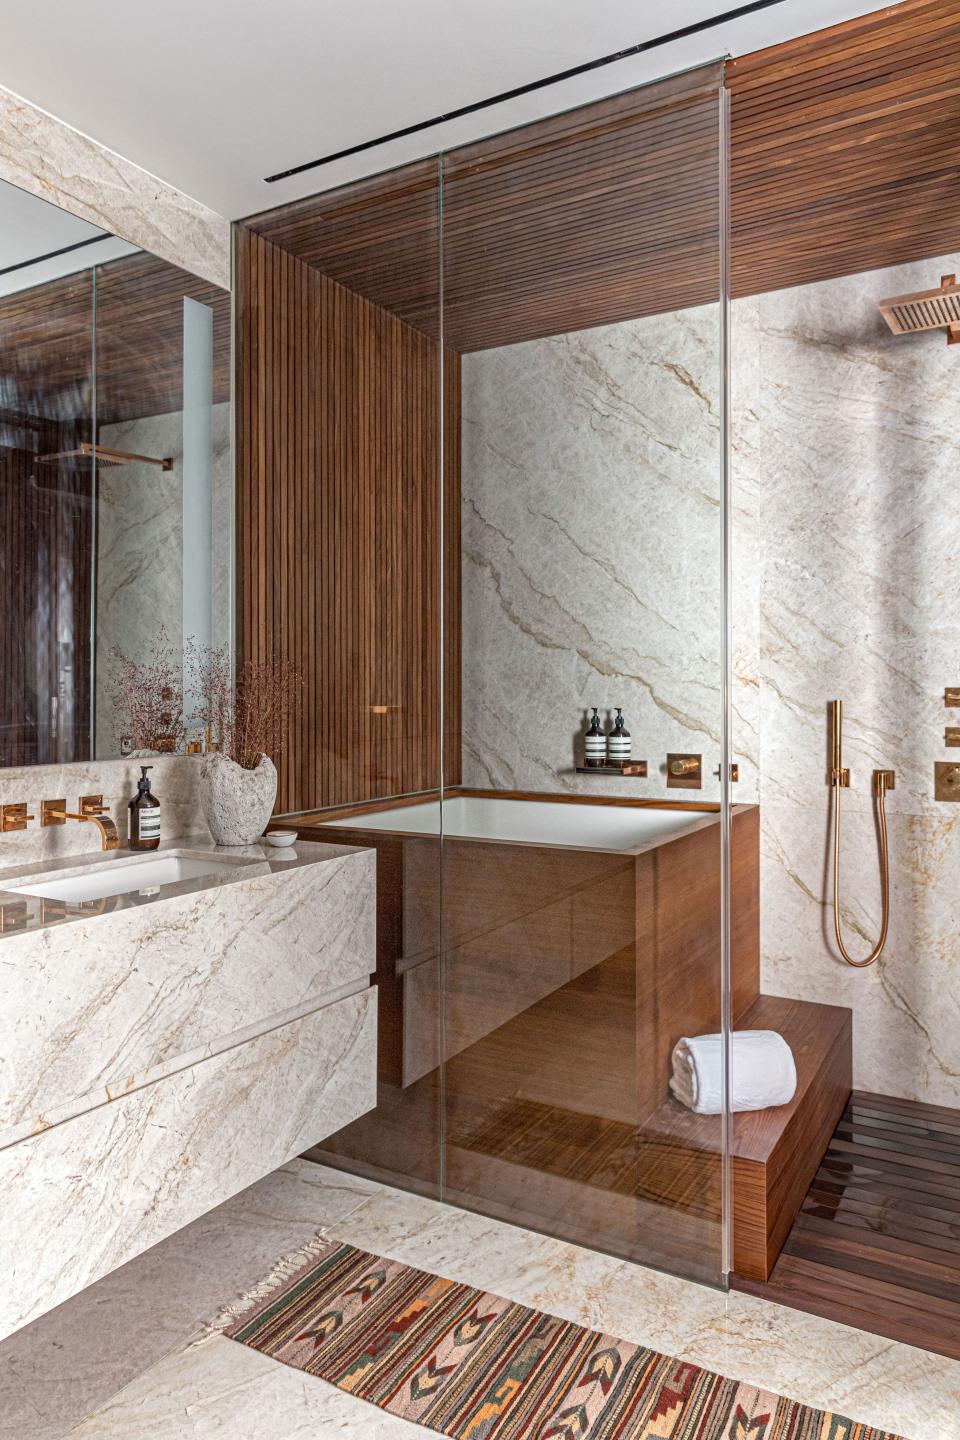 Glass, marble, and teak are the only materials used in the primary bath, which features a massive shower and soaking tub. As for the fixtures, Shea strayed outside of her comfort zone and went with rose gold. “It counteracts with the marble in such a beautiful way,” she says.